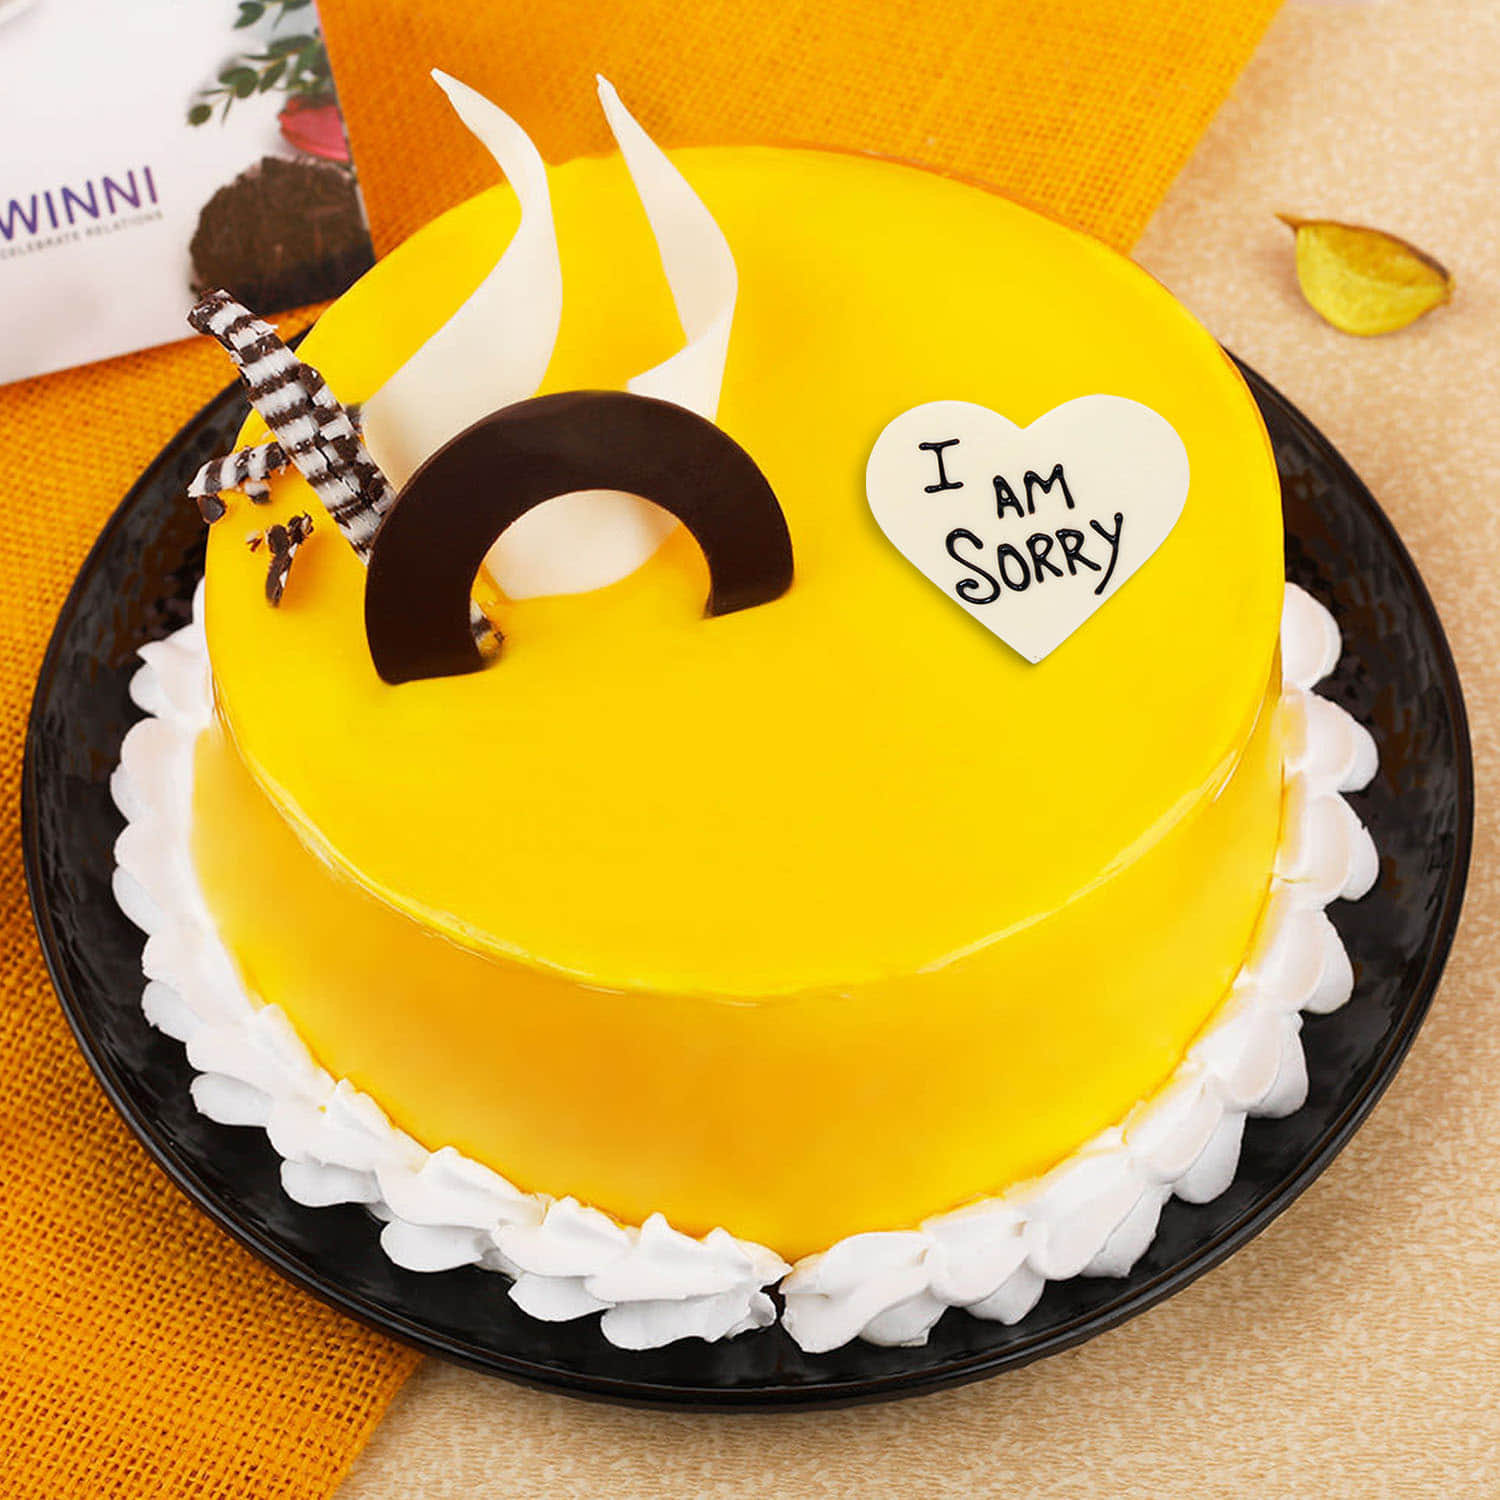 Winni Cakes & More | Order Online from Winni Cakes & More in Pune